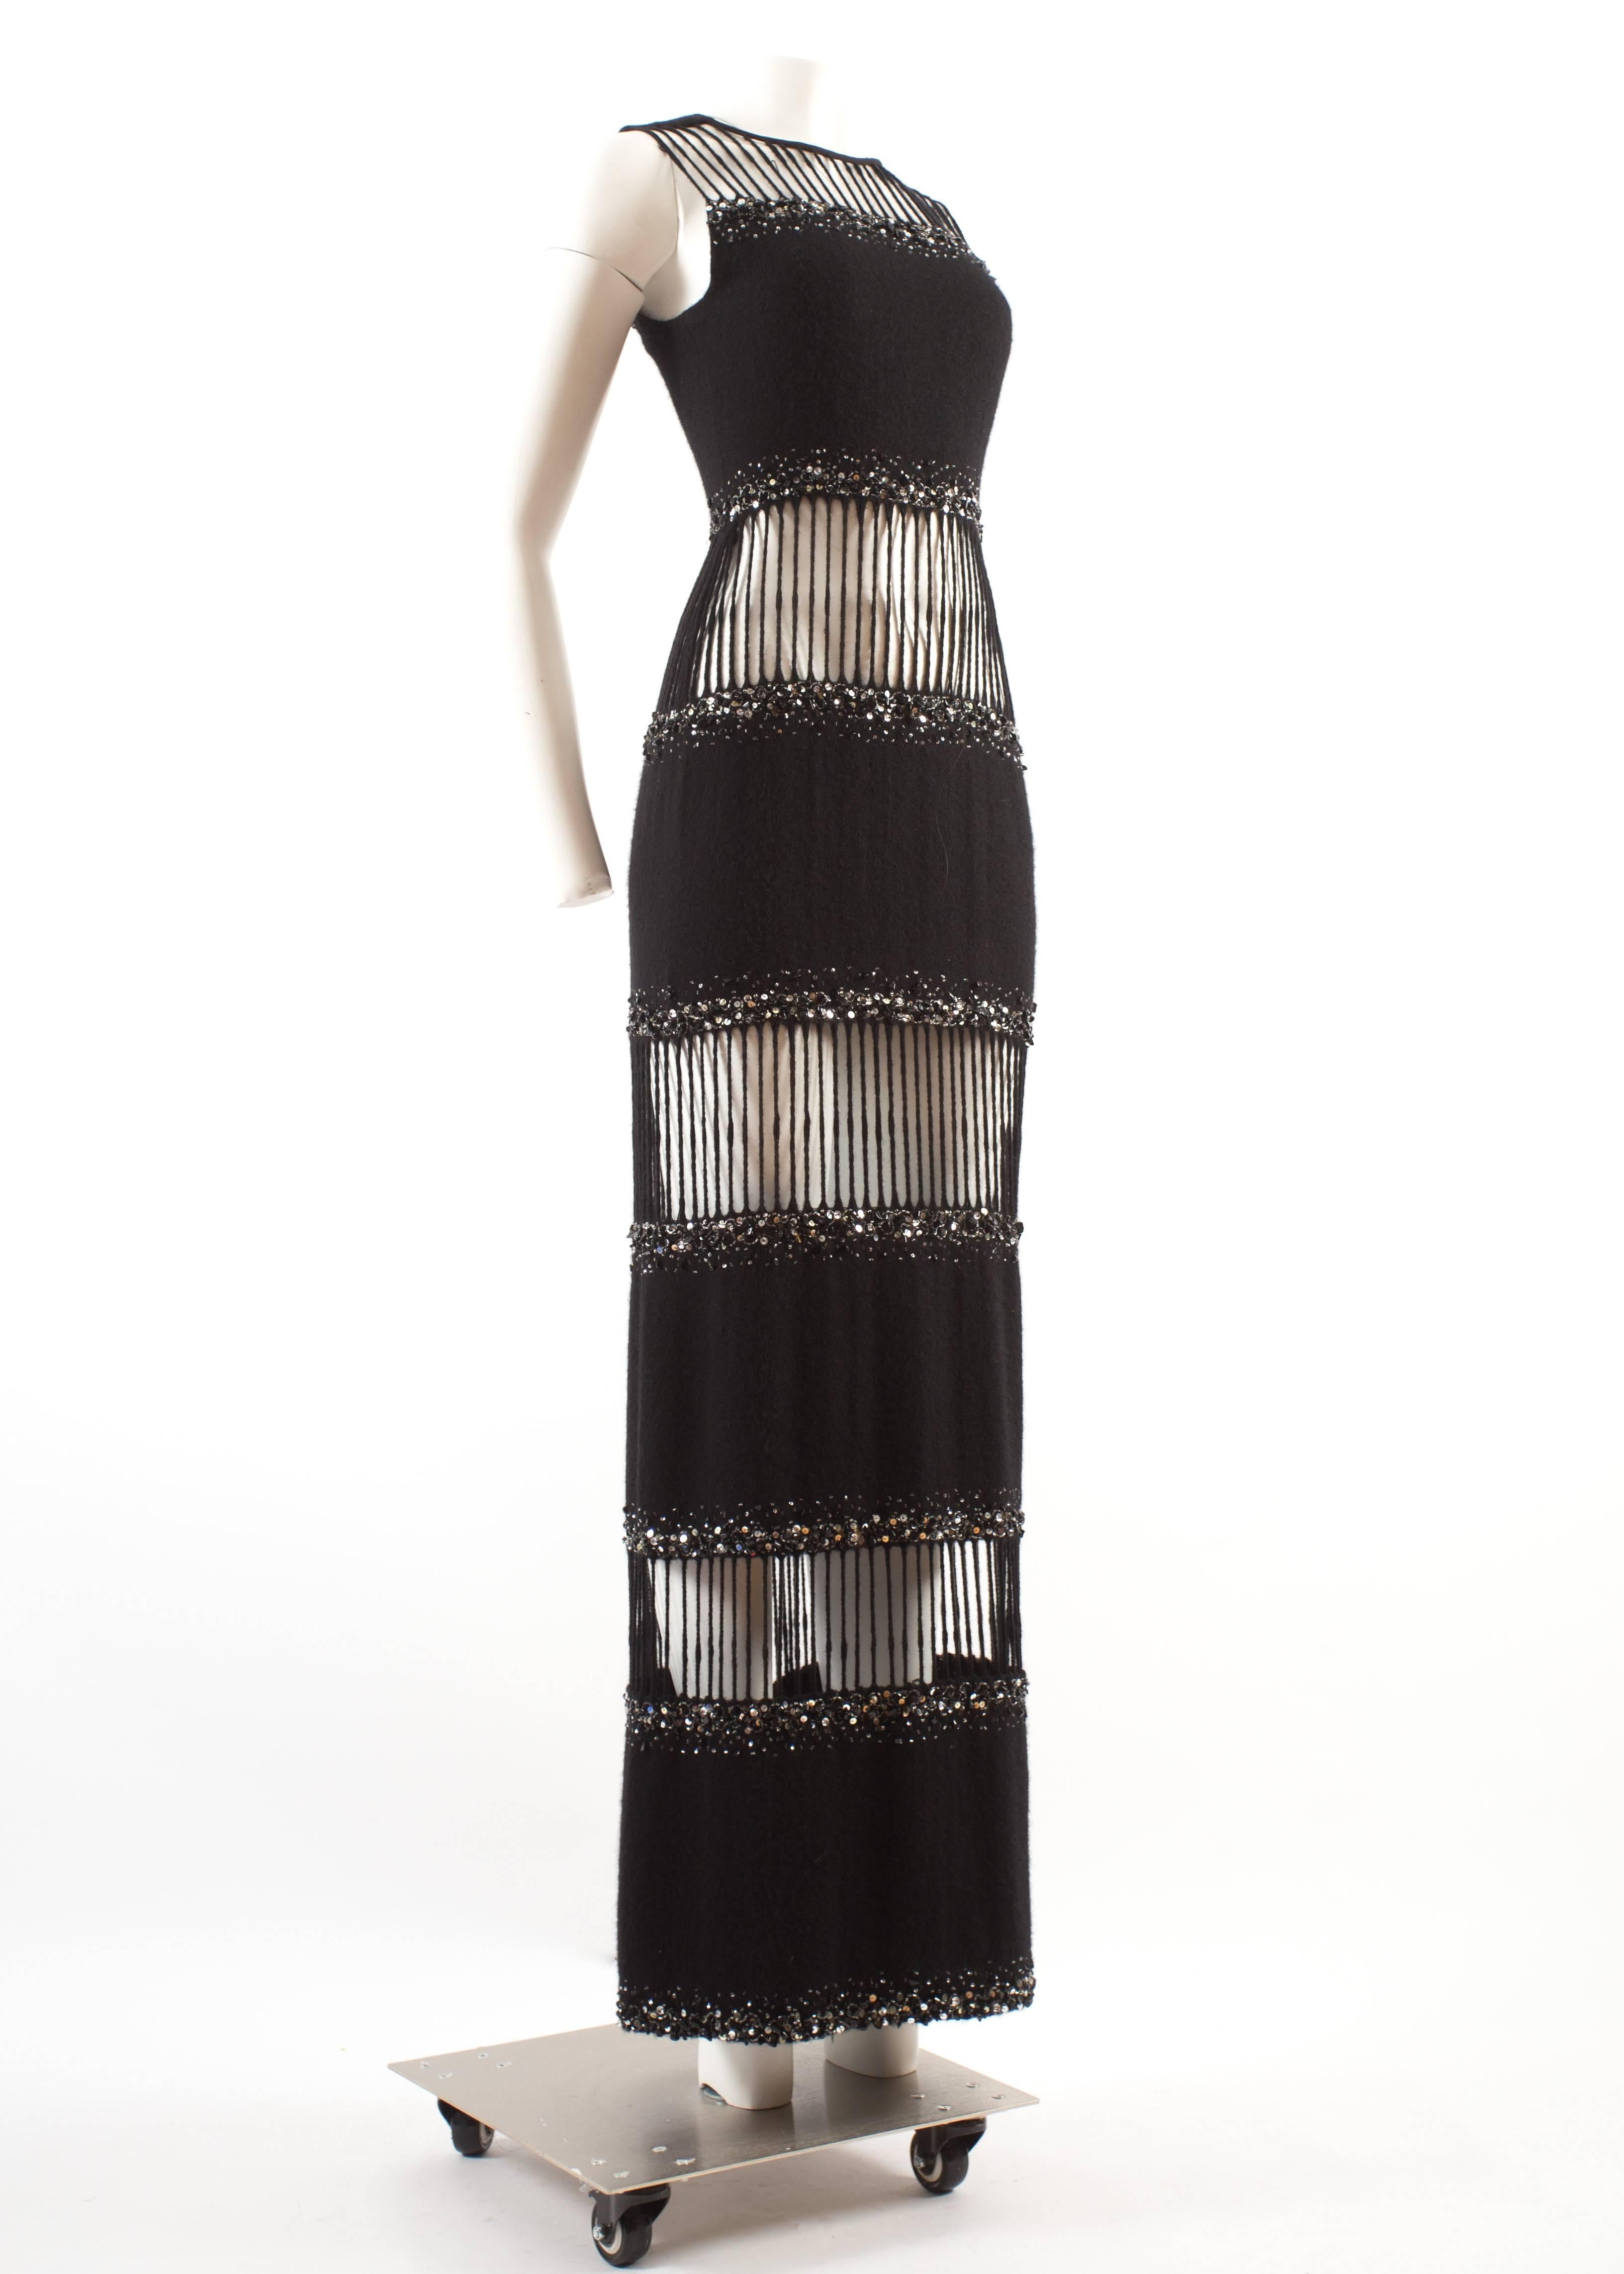 Black Hardy Amies 1960s couture embellished column evening dress with cutouts